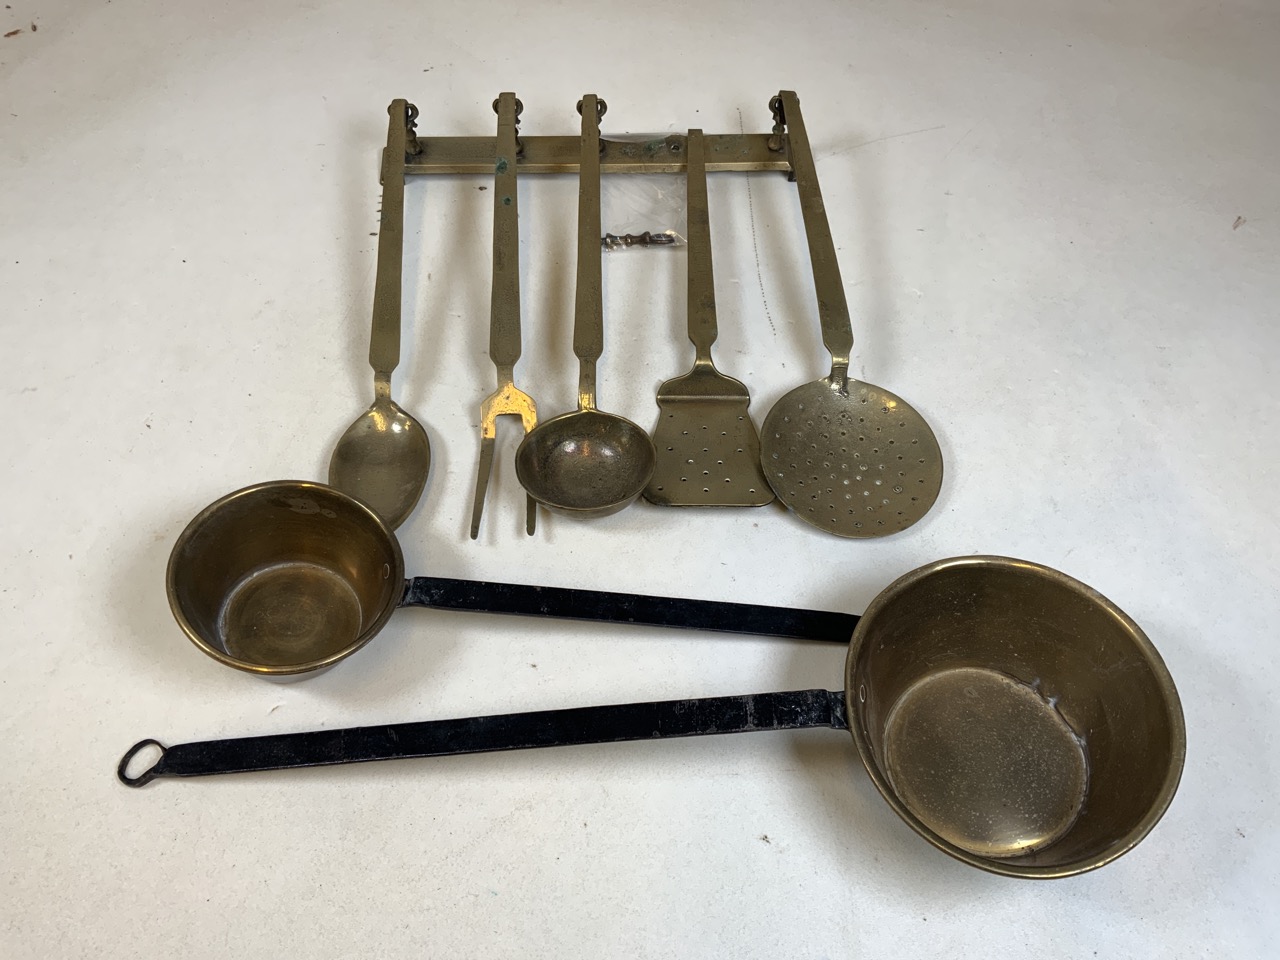 Vintage brass kitchenalia, a brass hanging rail with five utensils and two small brass pans with